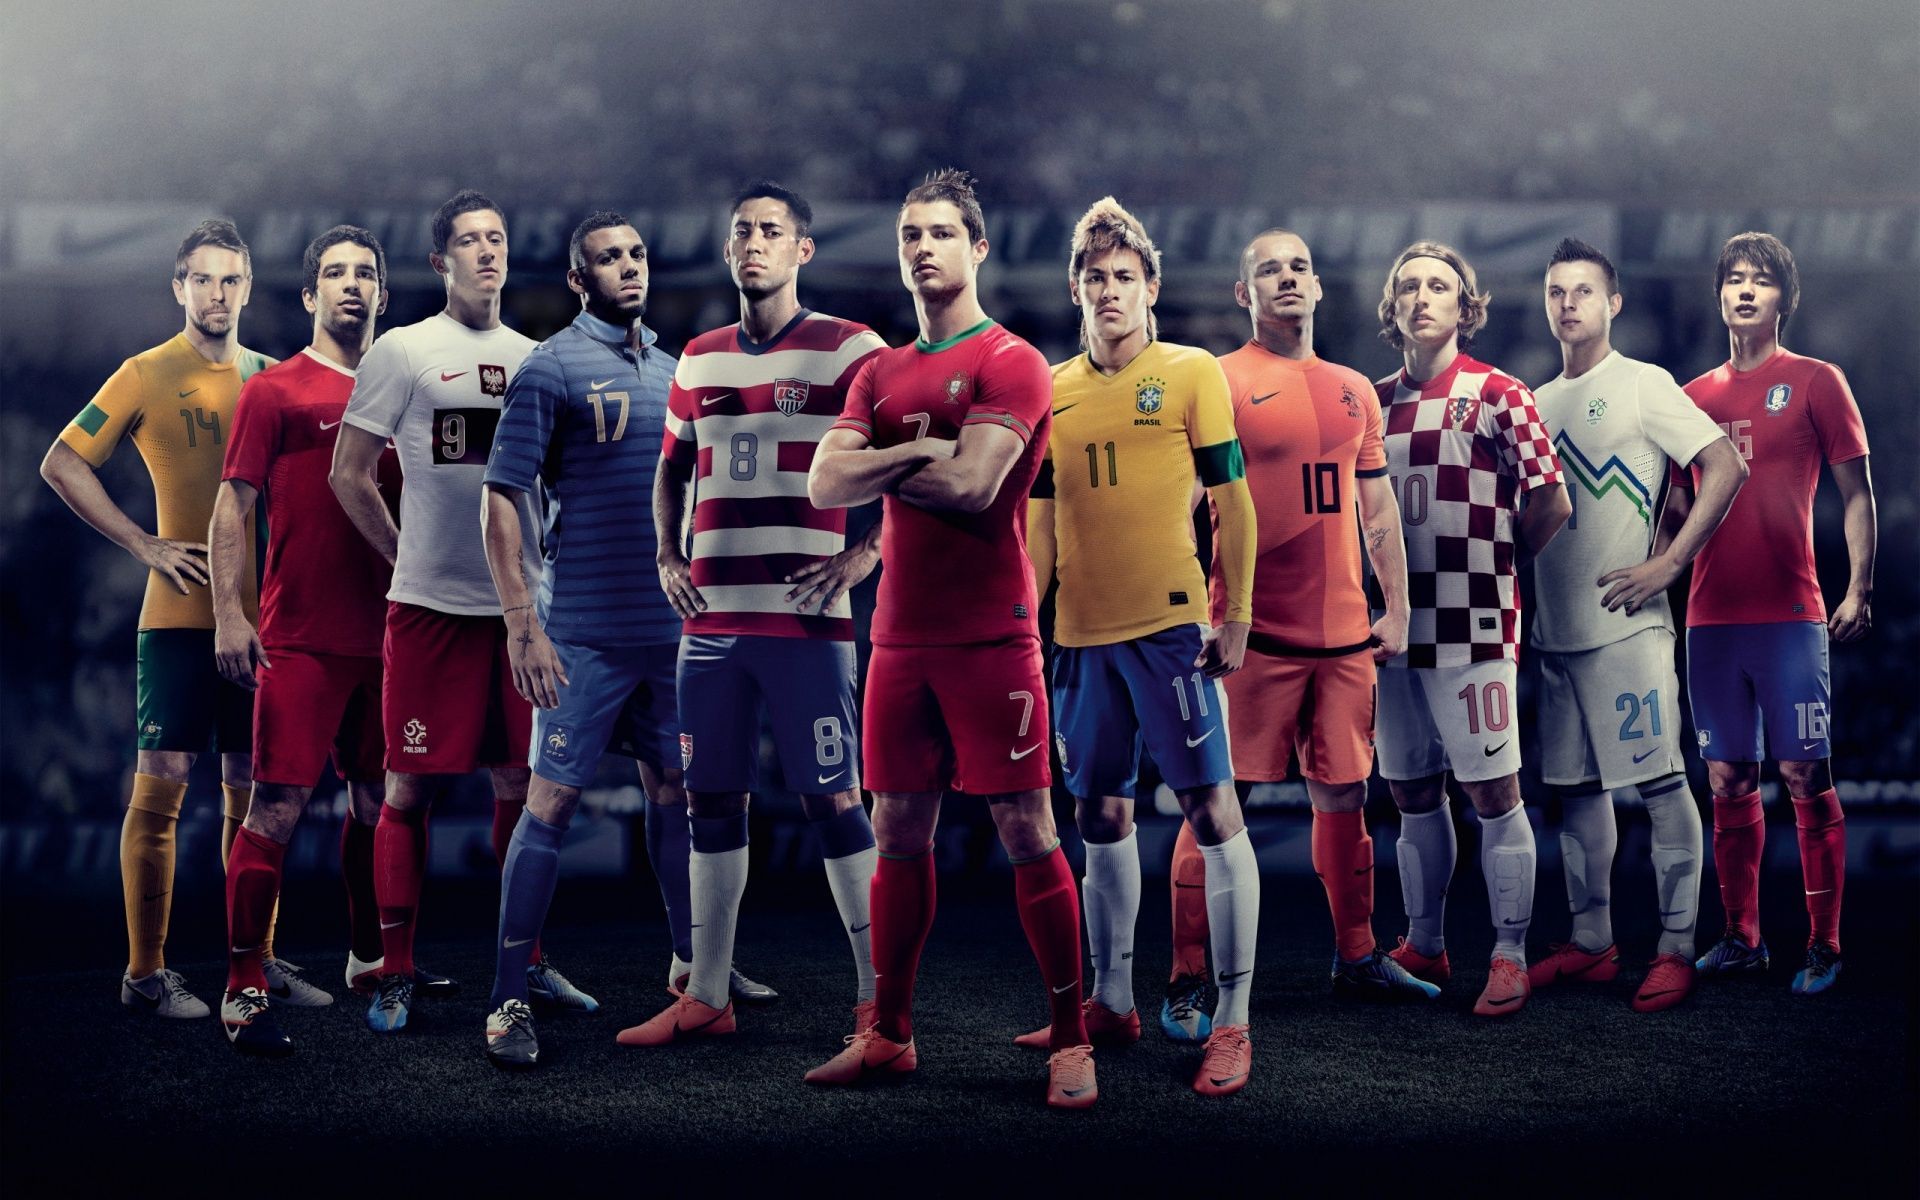 Foot Ball Players Wallpapers